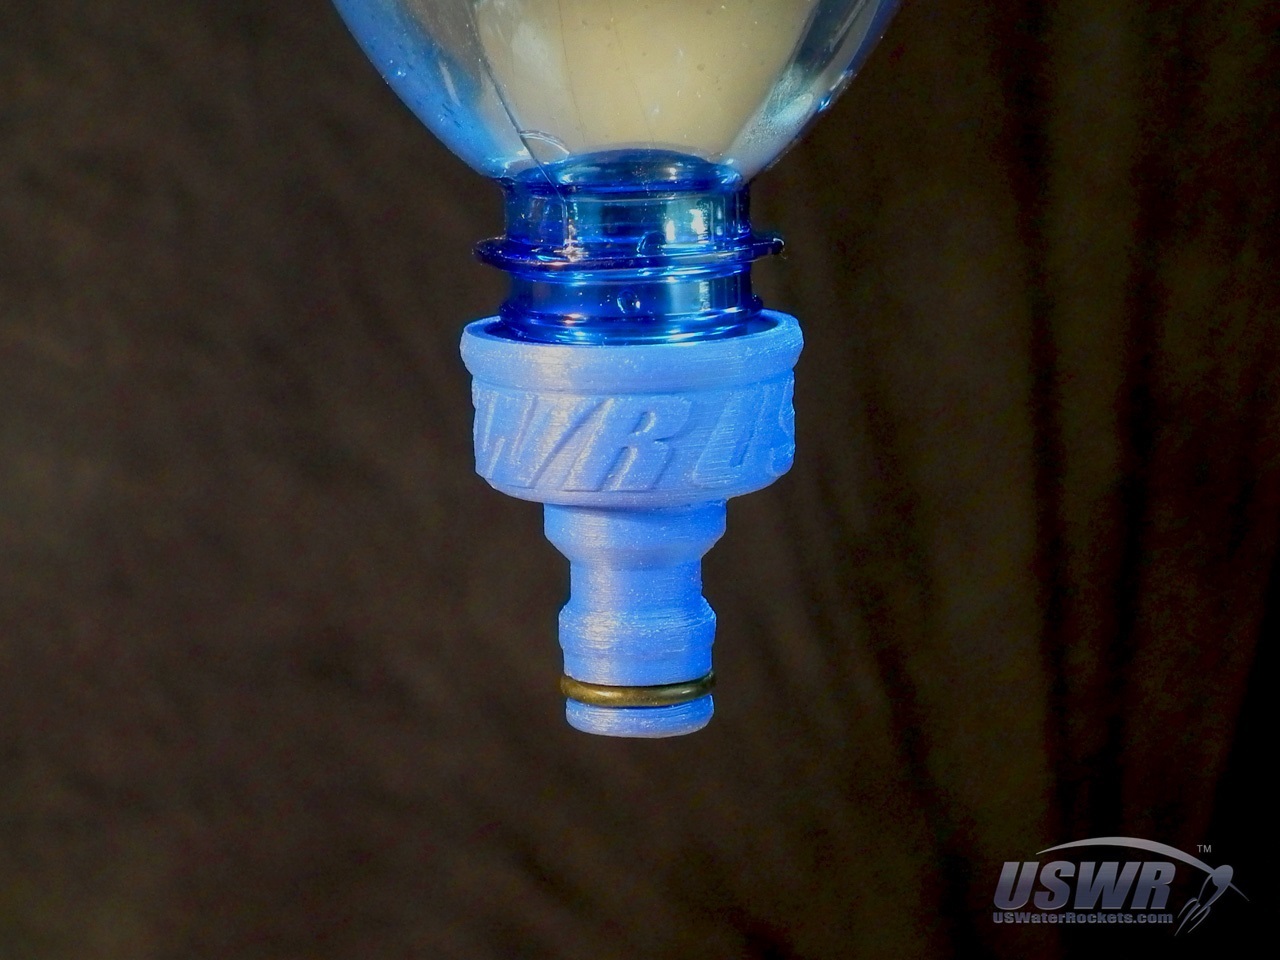 This 3D Printed Nozzle is used for Water Rockets.